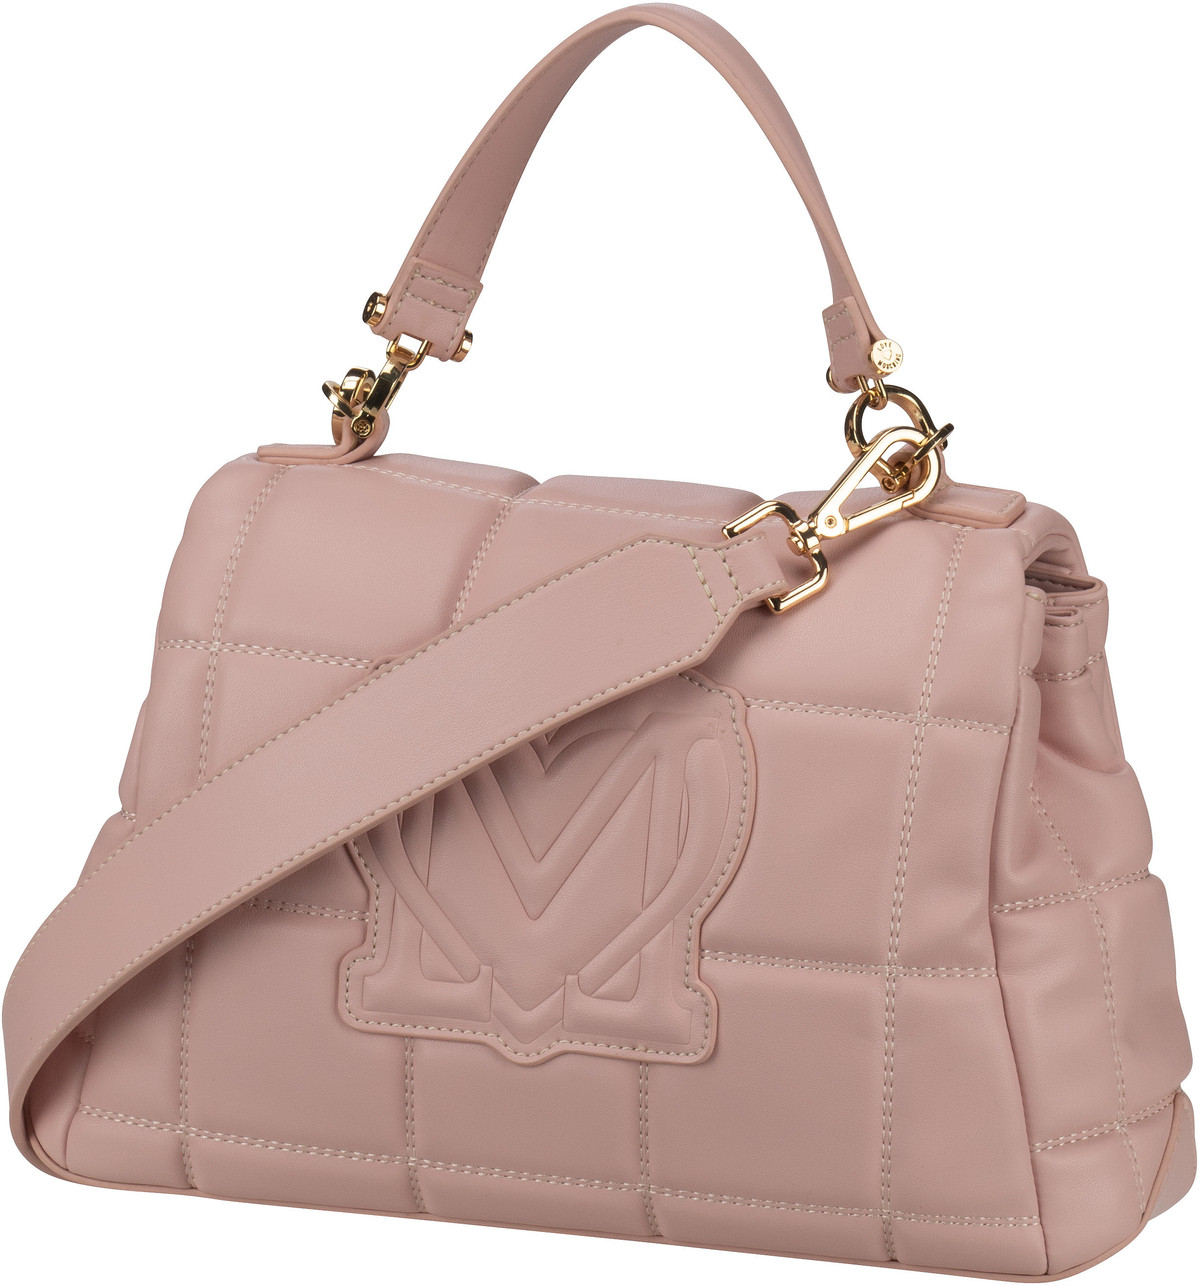 Love Moschino Embroidery Quilted Handbag 4264 - Nude